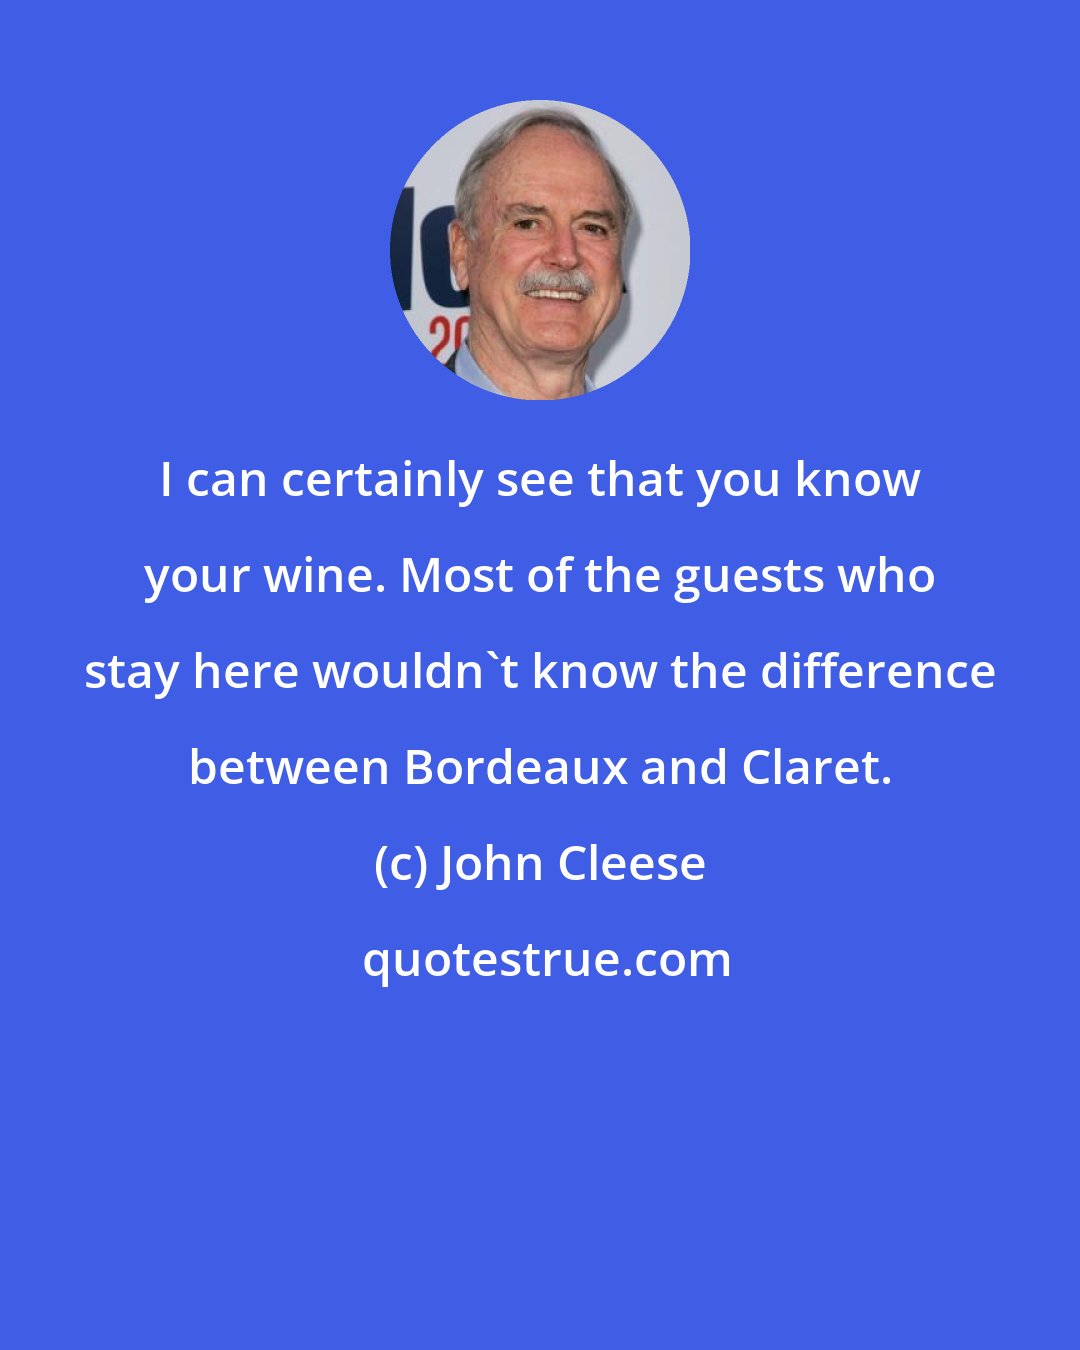 John Cleese: I can certainly see that you know your wine. Most of the guests who stay here wouldn't know the difference between Bordeaux and Claret.